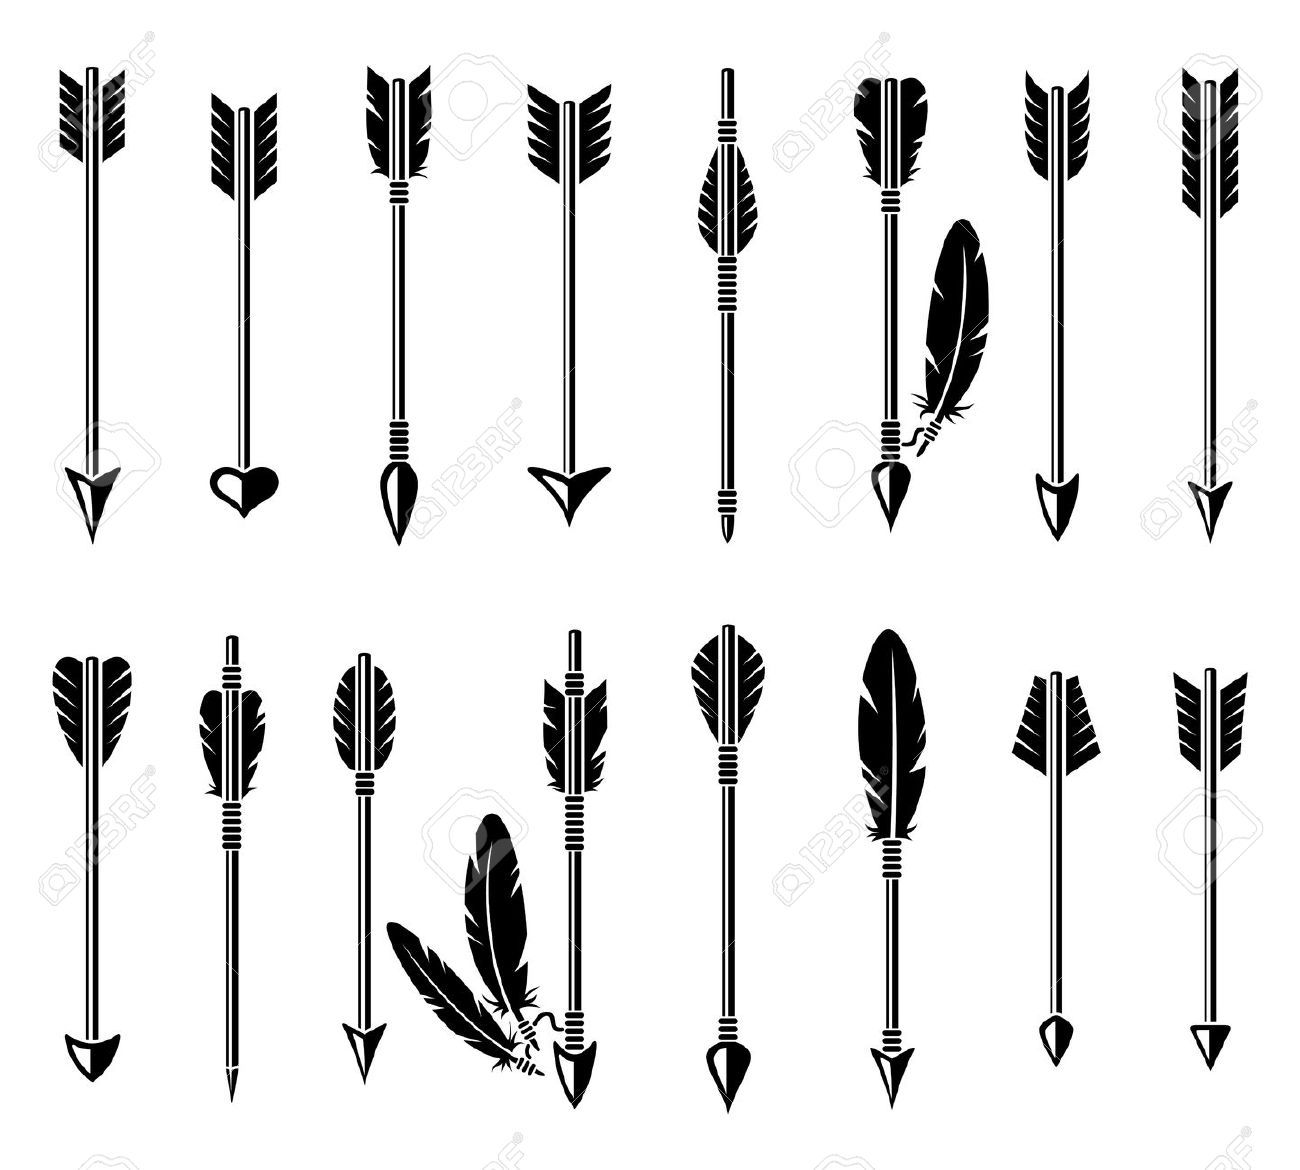 Download Feather Arrow Vector at Vectorified.com | Collection of ...